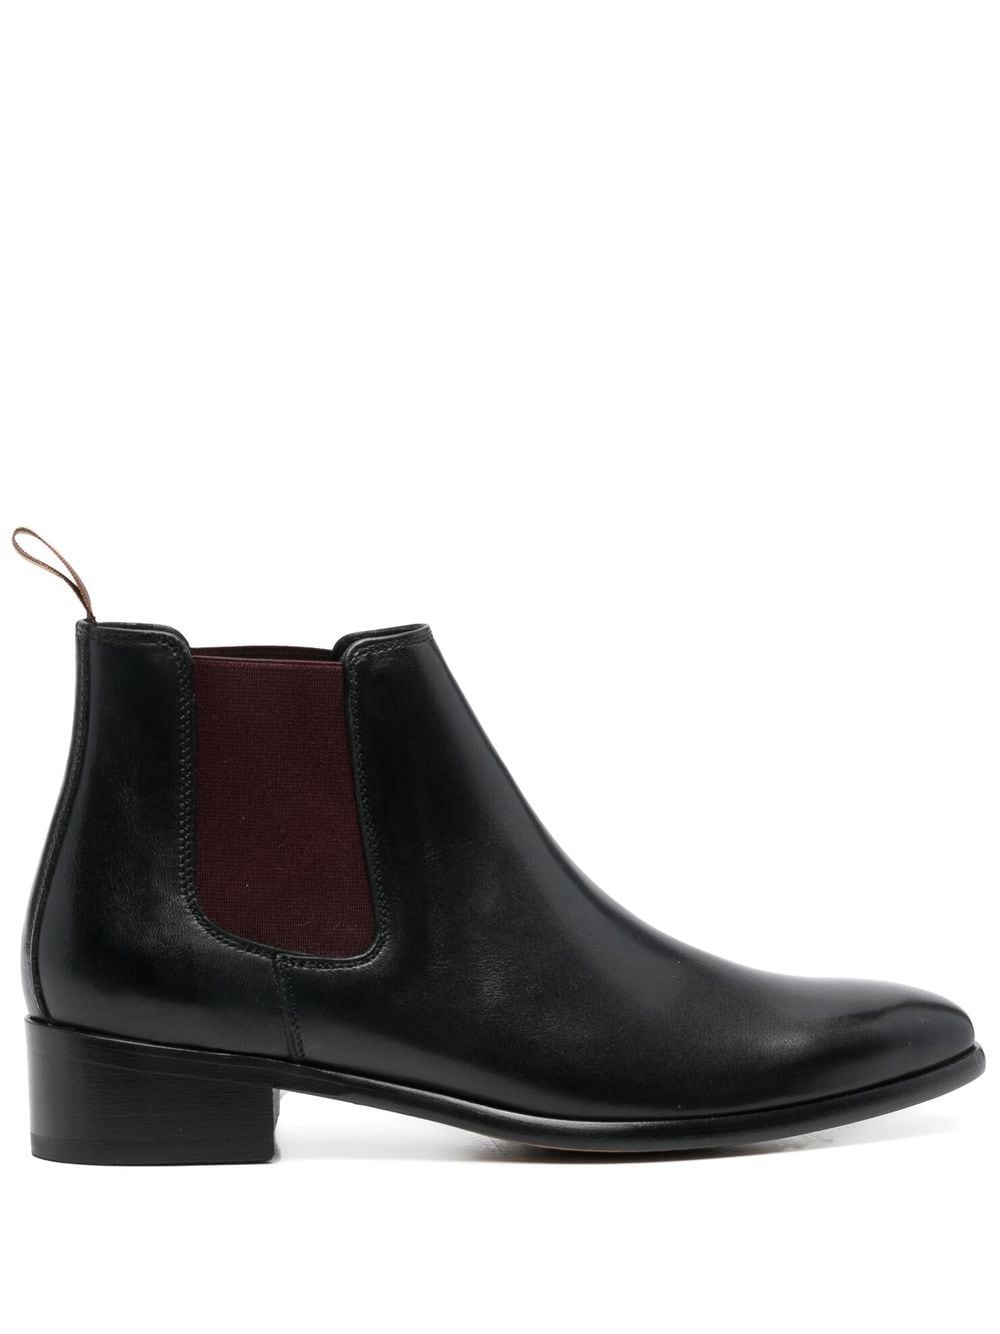 Paul Smith Pointed Toe Leather Boots - Farfetch